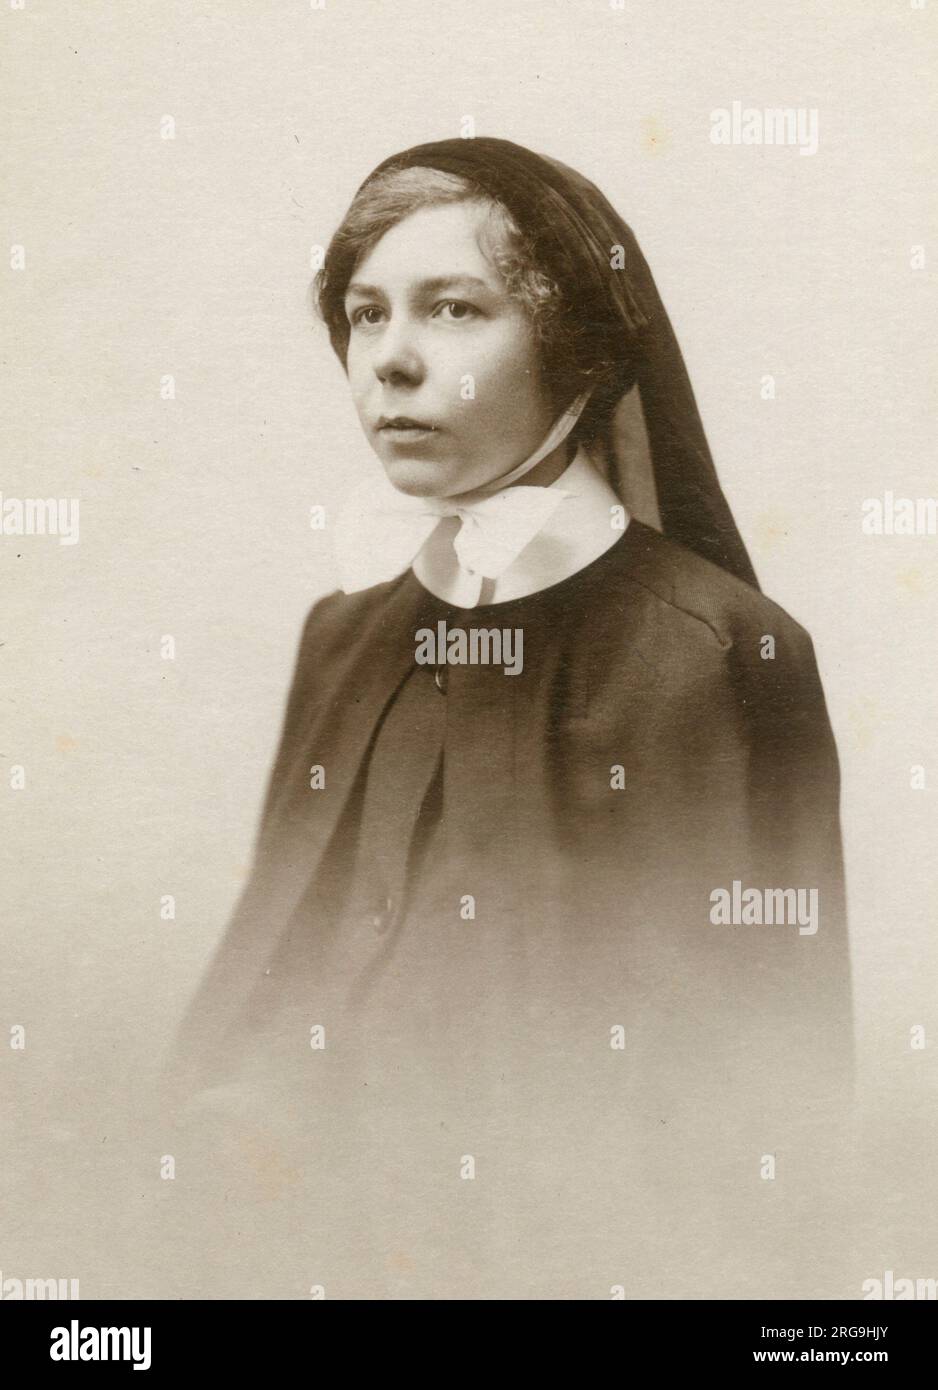 A Studio portrait photograph of a young nurse in her uniform - North East England. WW1 era. Stock Photo